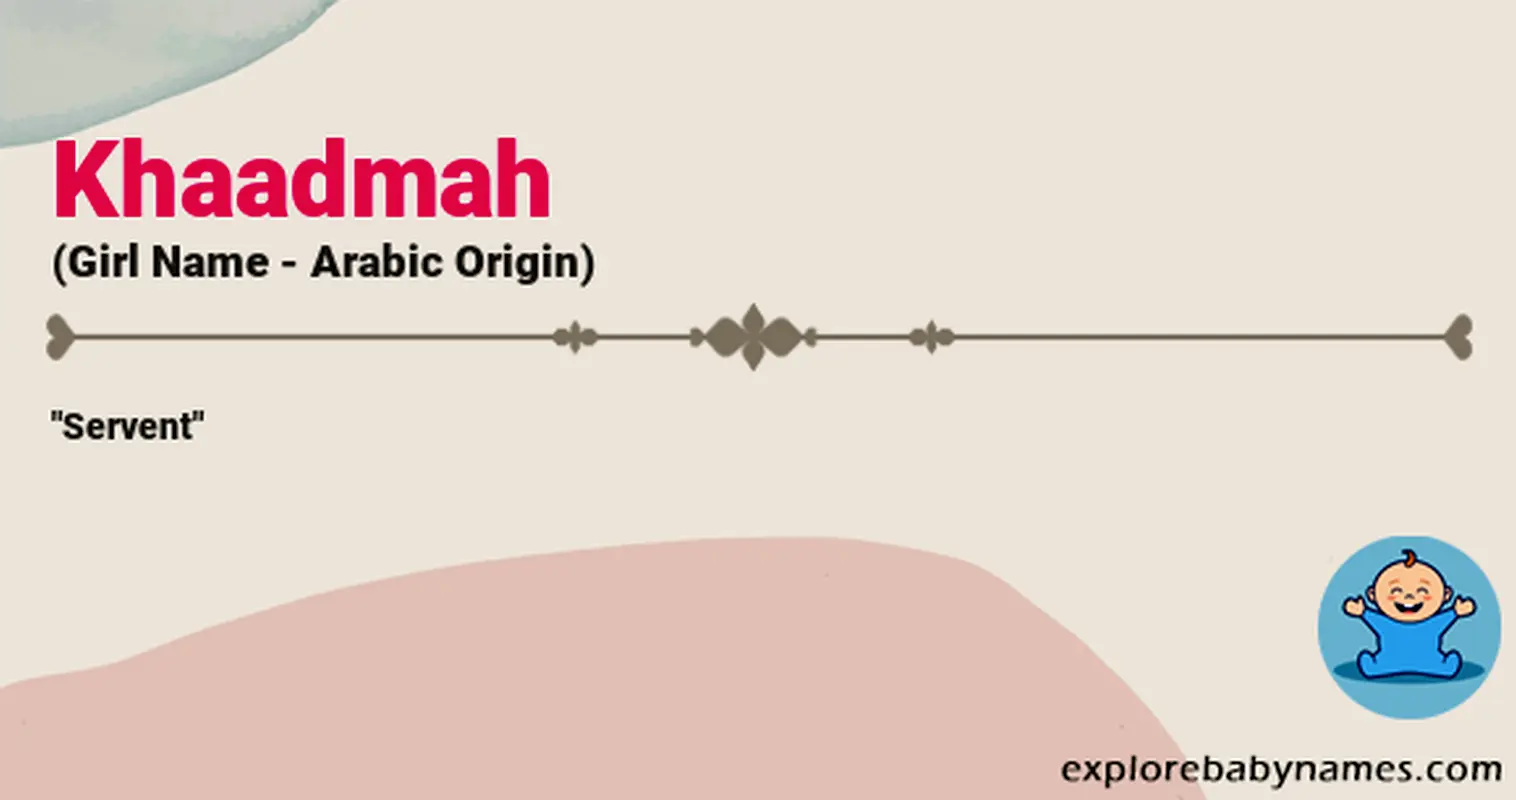 Meaning of Khaadmah